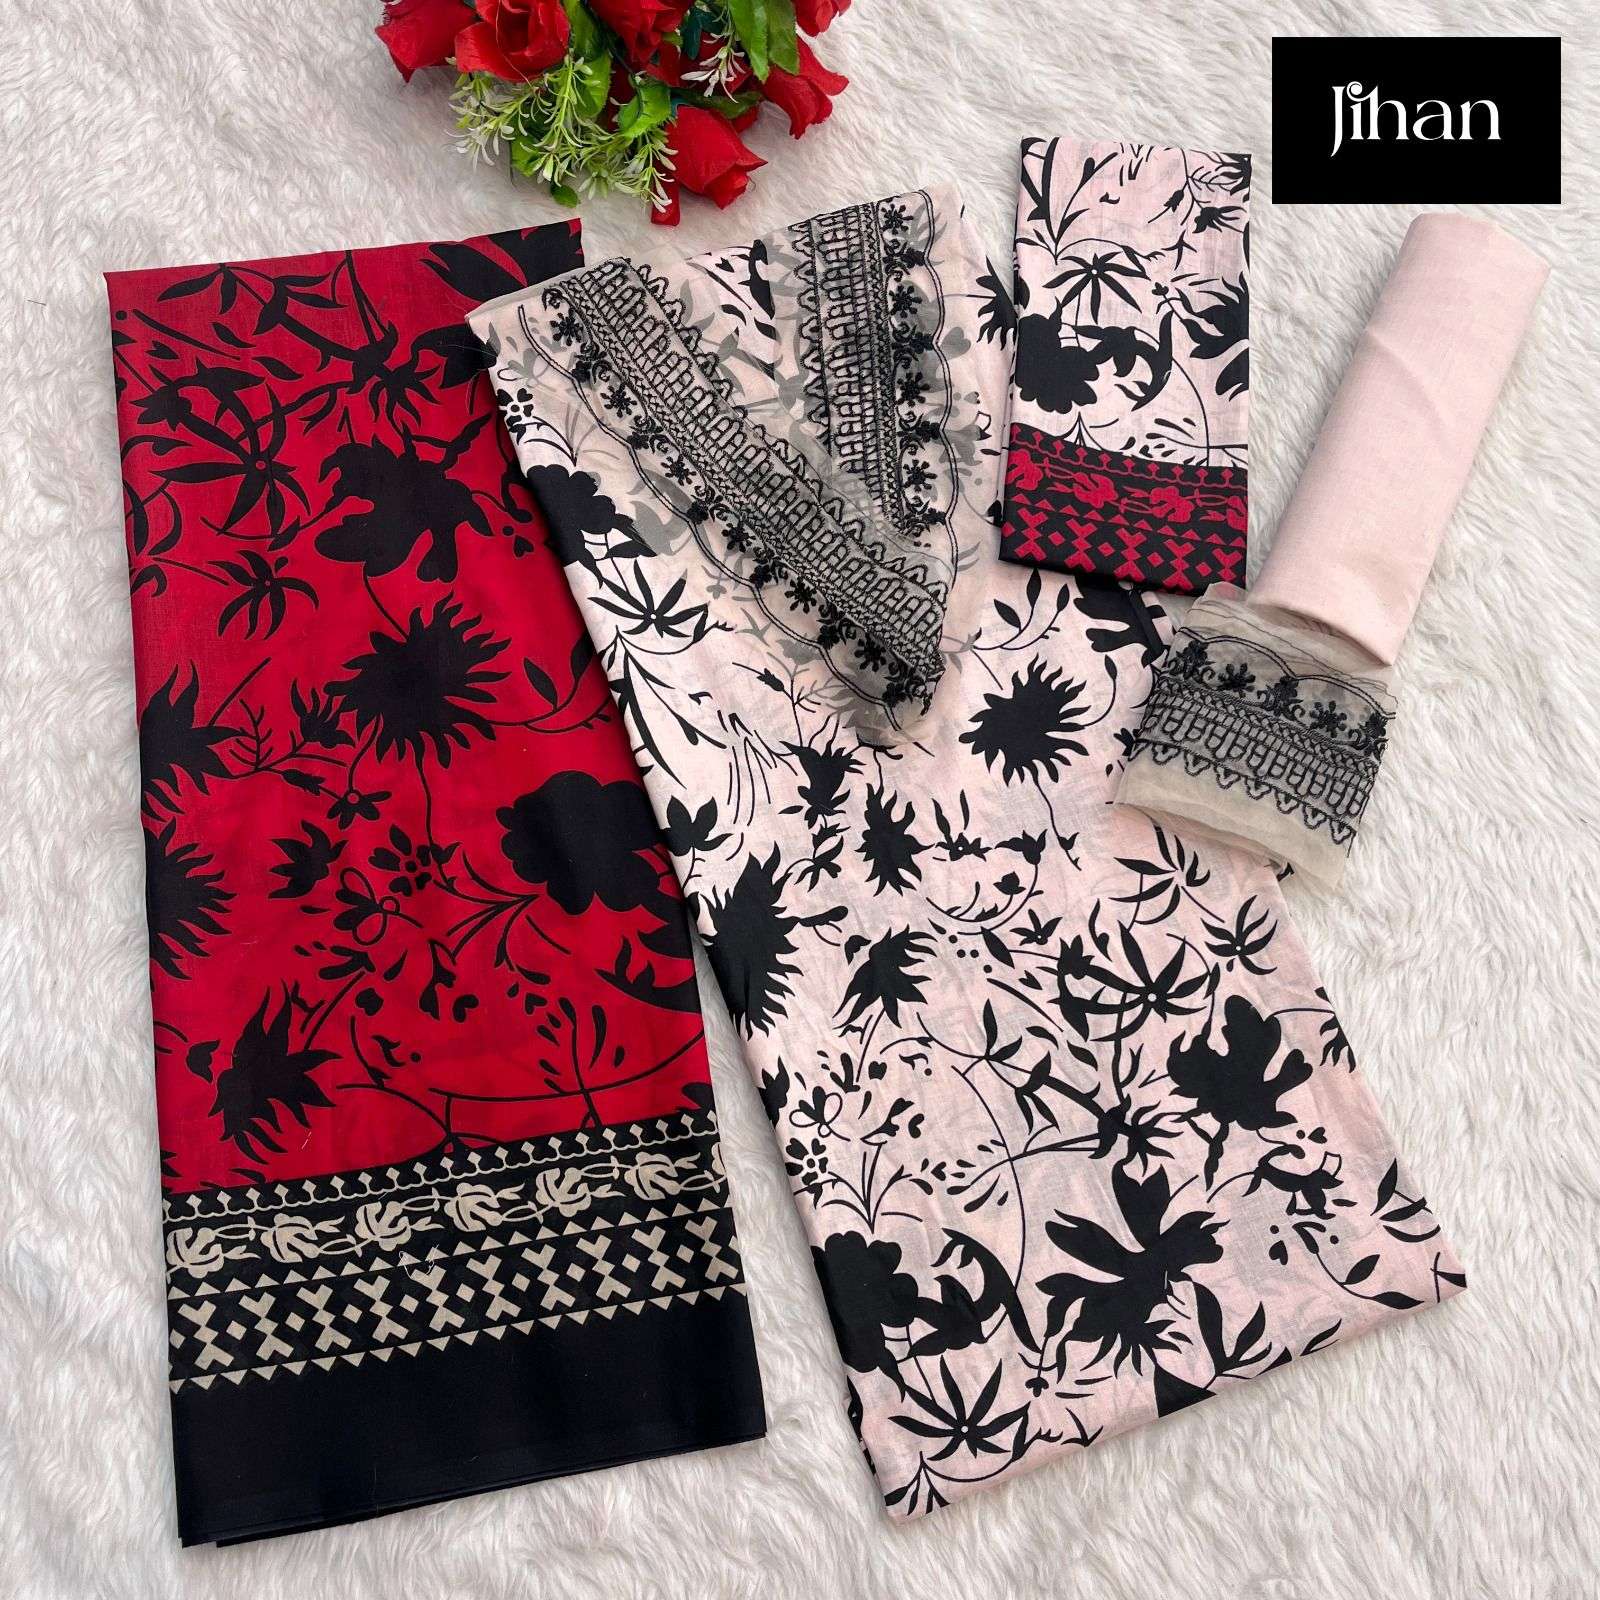 JIHAN IMPERIAL COLLECTION VOL 1 